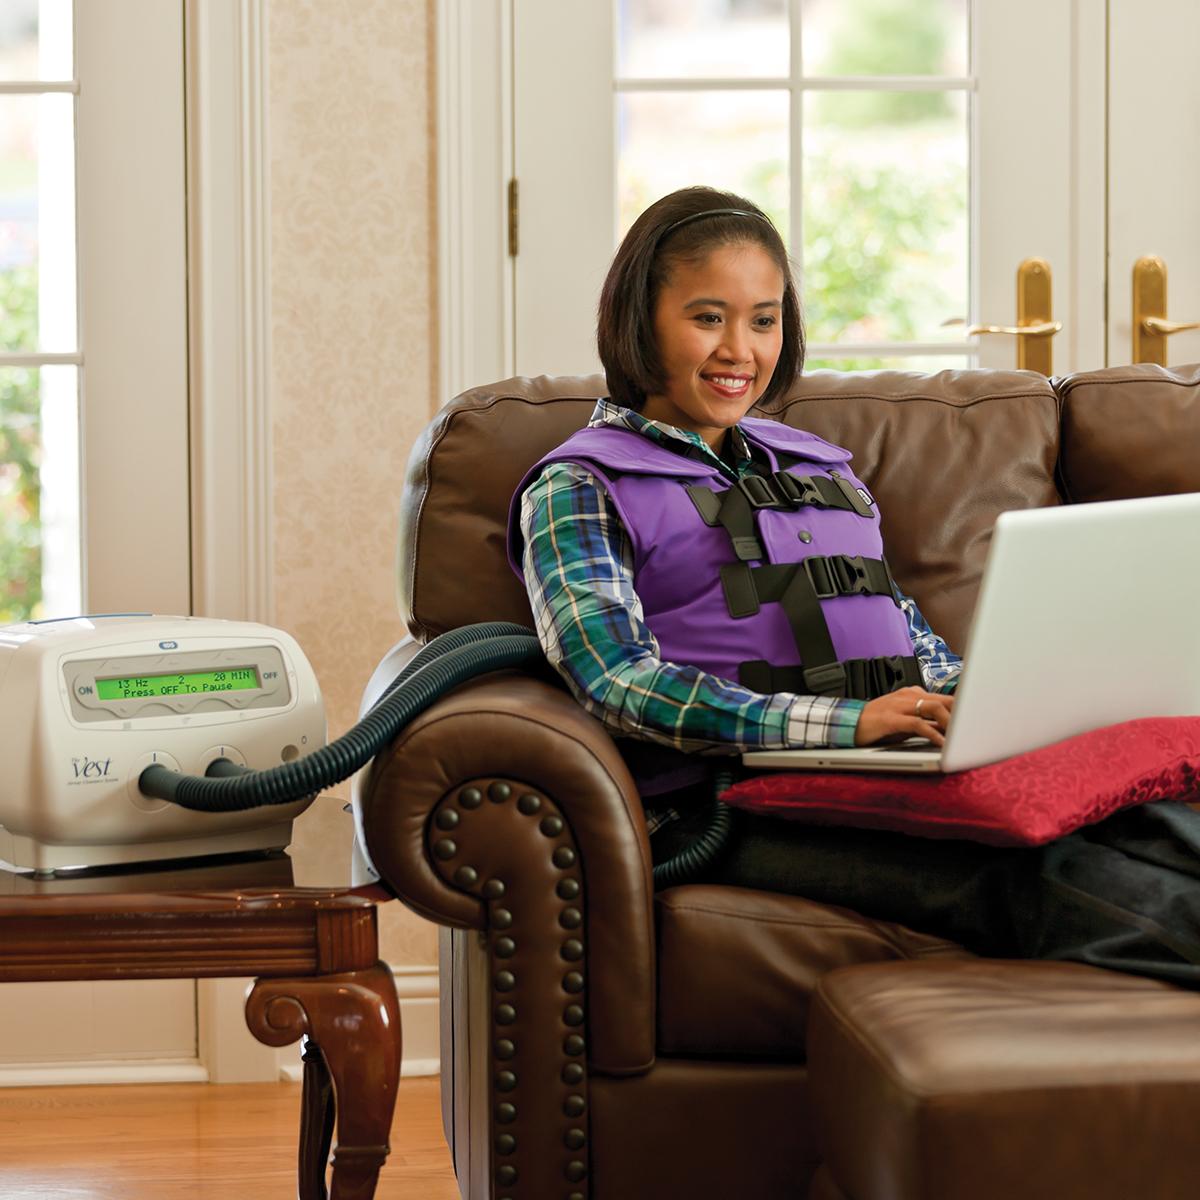 The Vest System, Model 105, Colour Me Purple Vest, worn by young woman sitting on couch in living room with laptop computer while doing her treatment